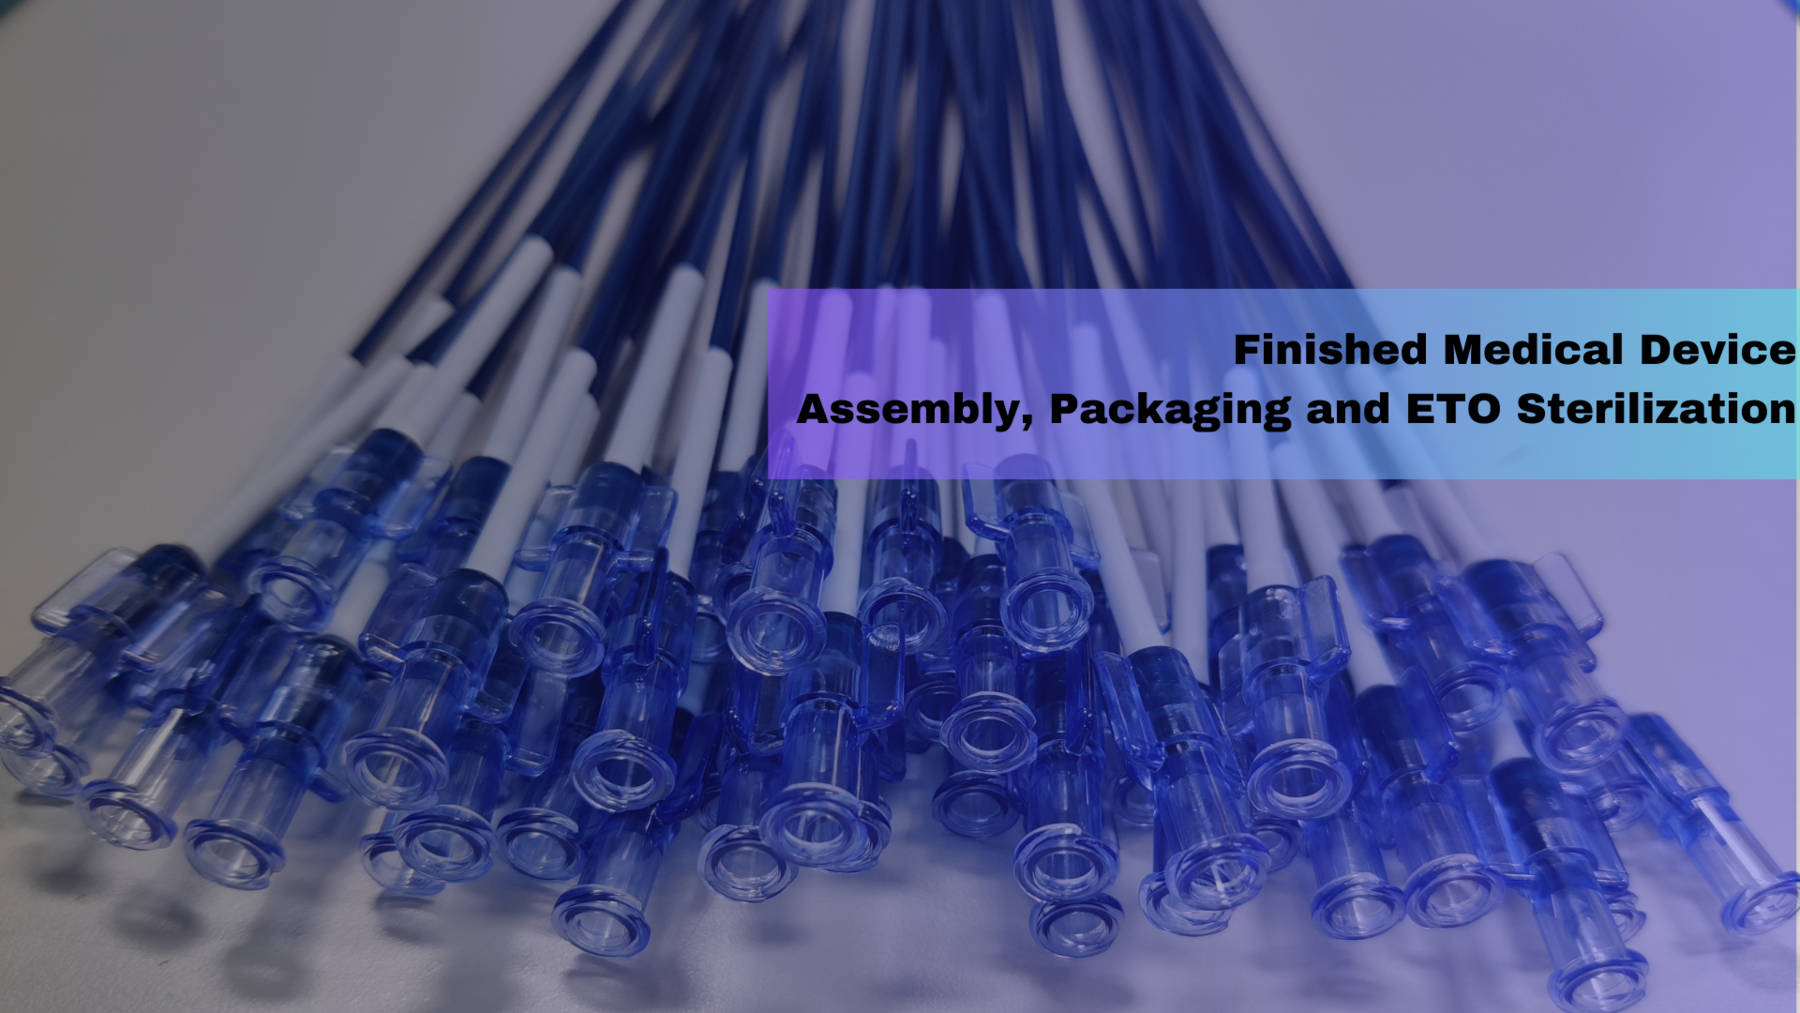 Finished Medical Device Assembly,Packaging and ETO Sterilization (2) (1)